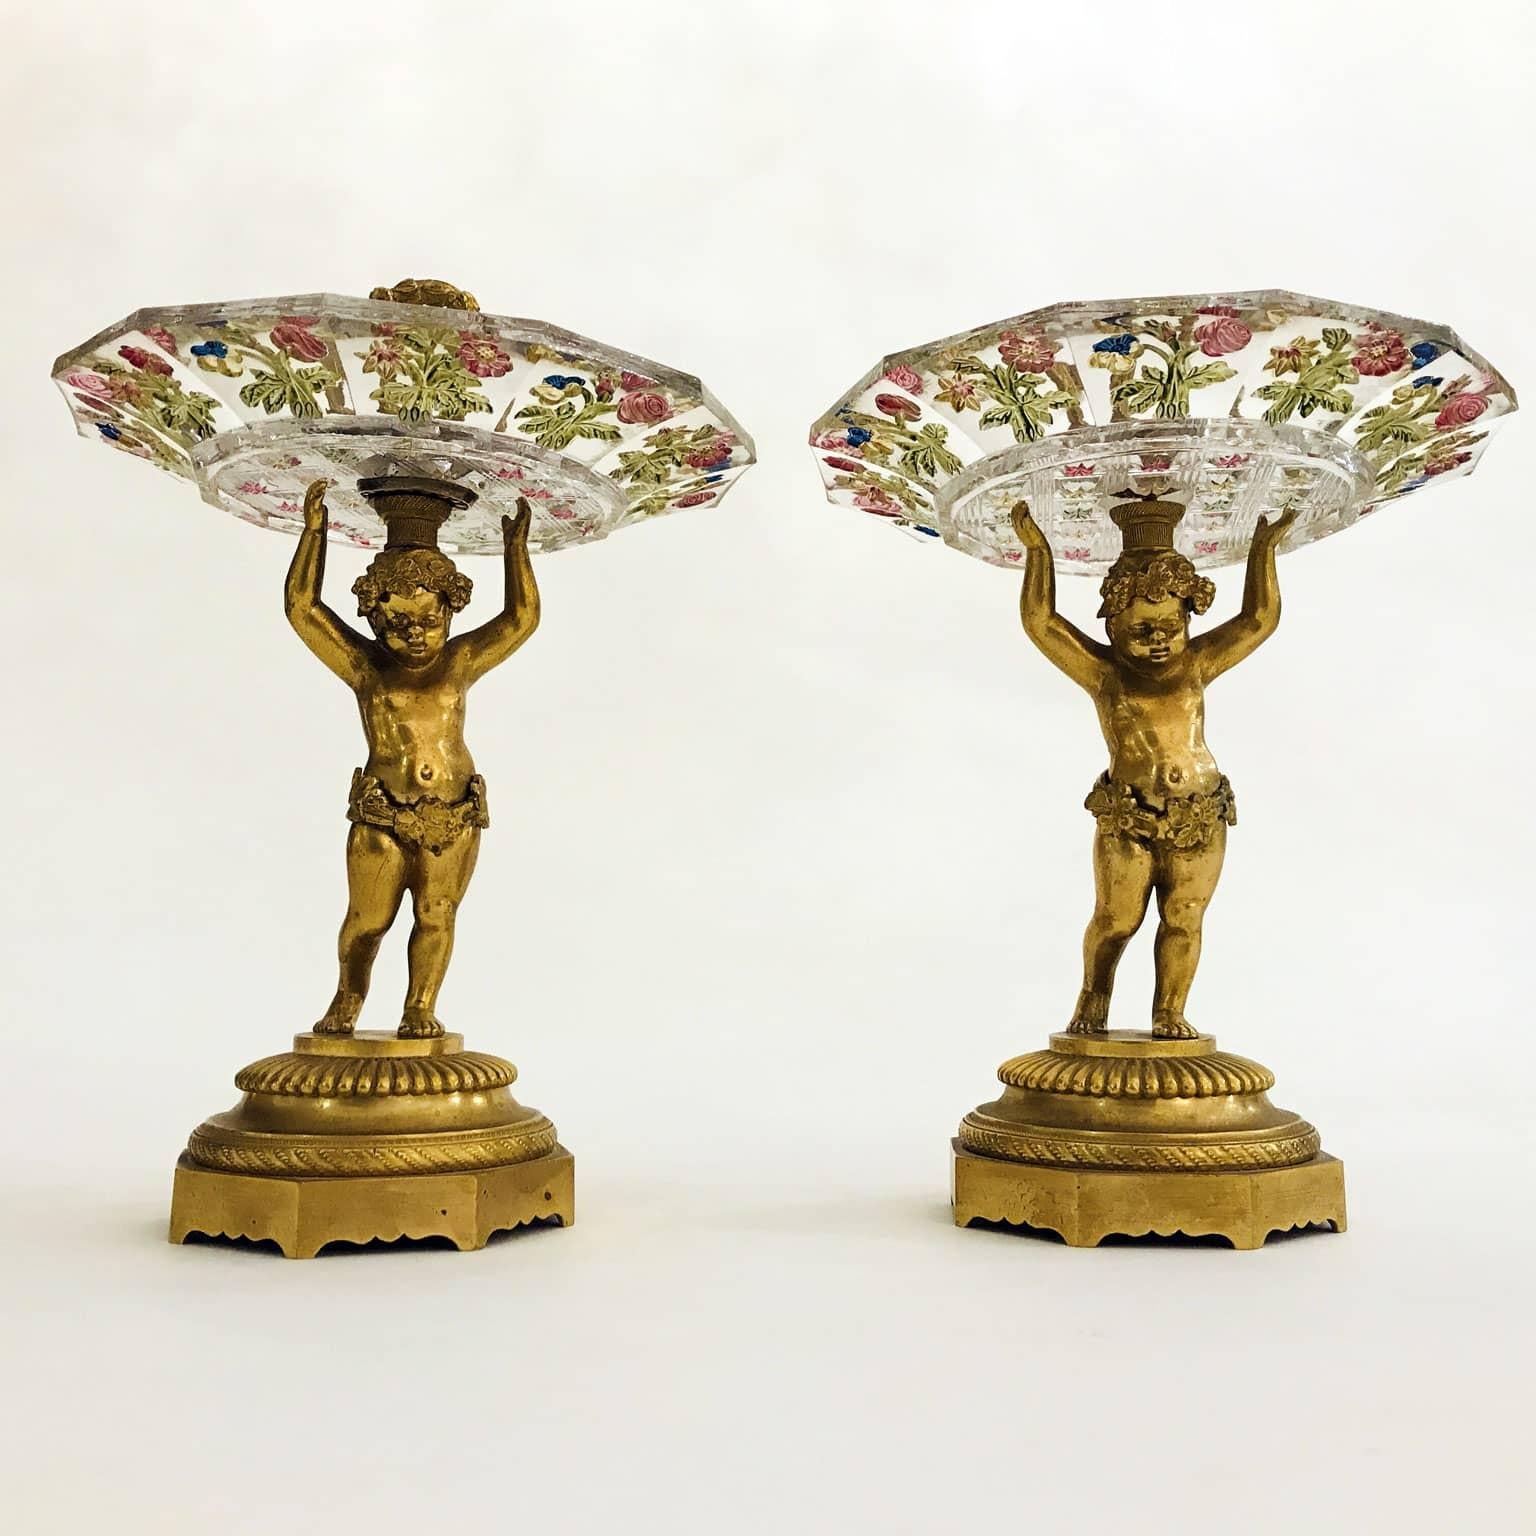 Bohemian Pair of Austrian Gilded Figural Comports with Putti 19th Century For Sale